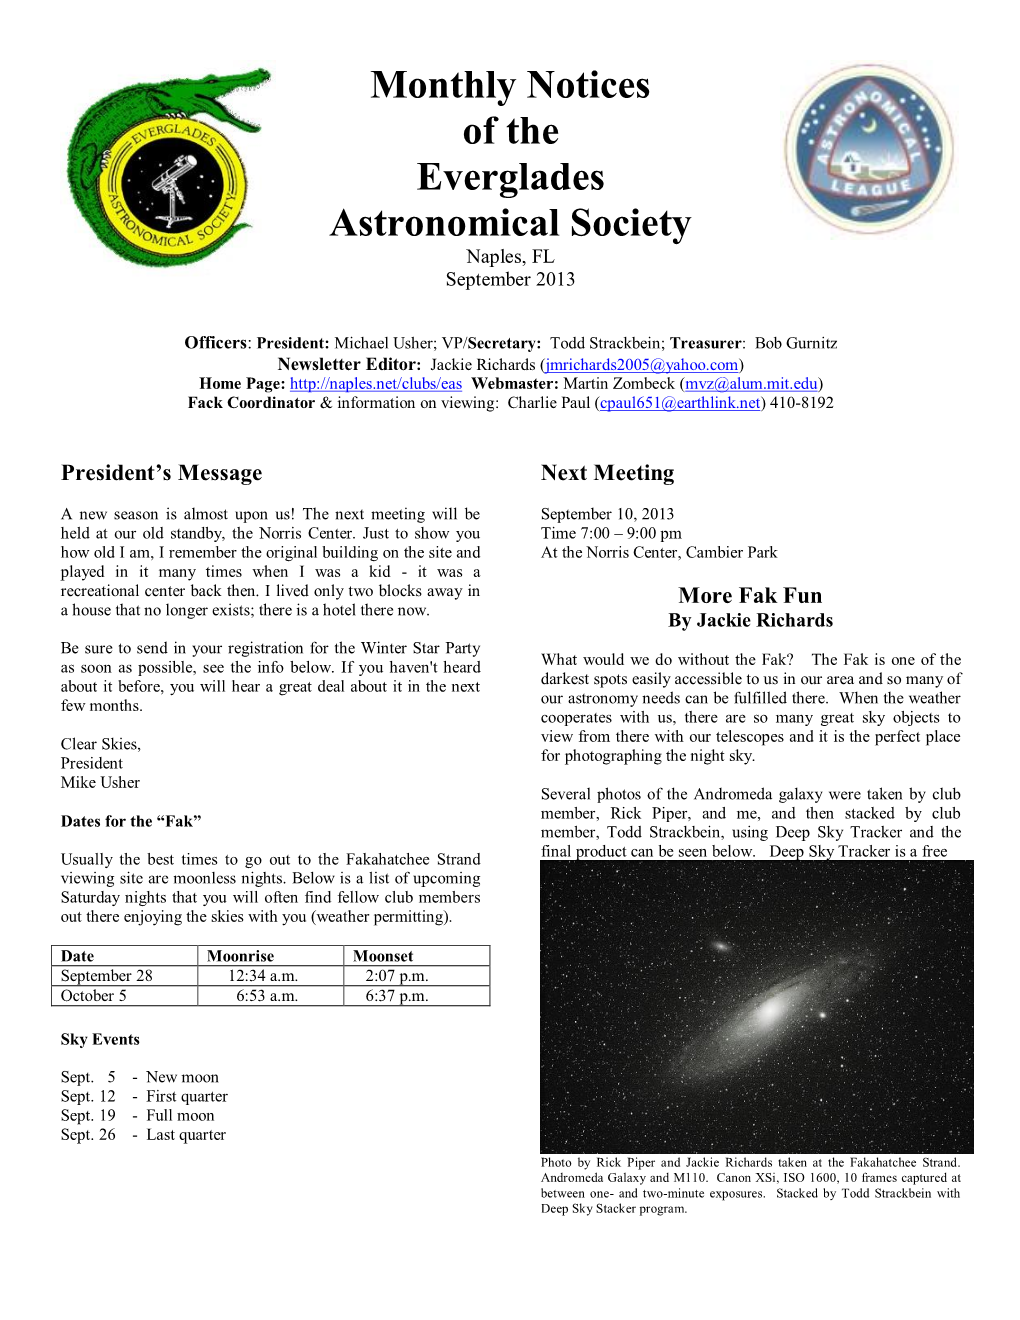 Monthly Notices of the Everglades Astronomical